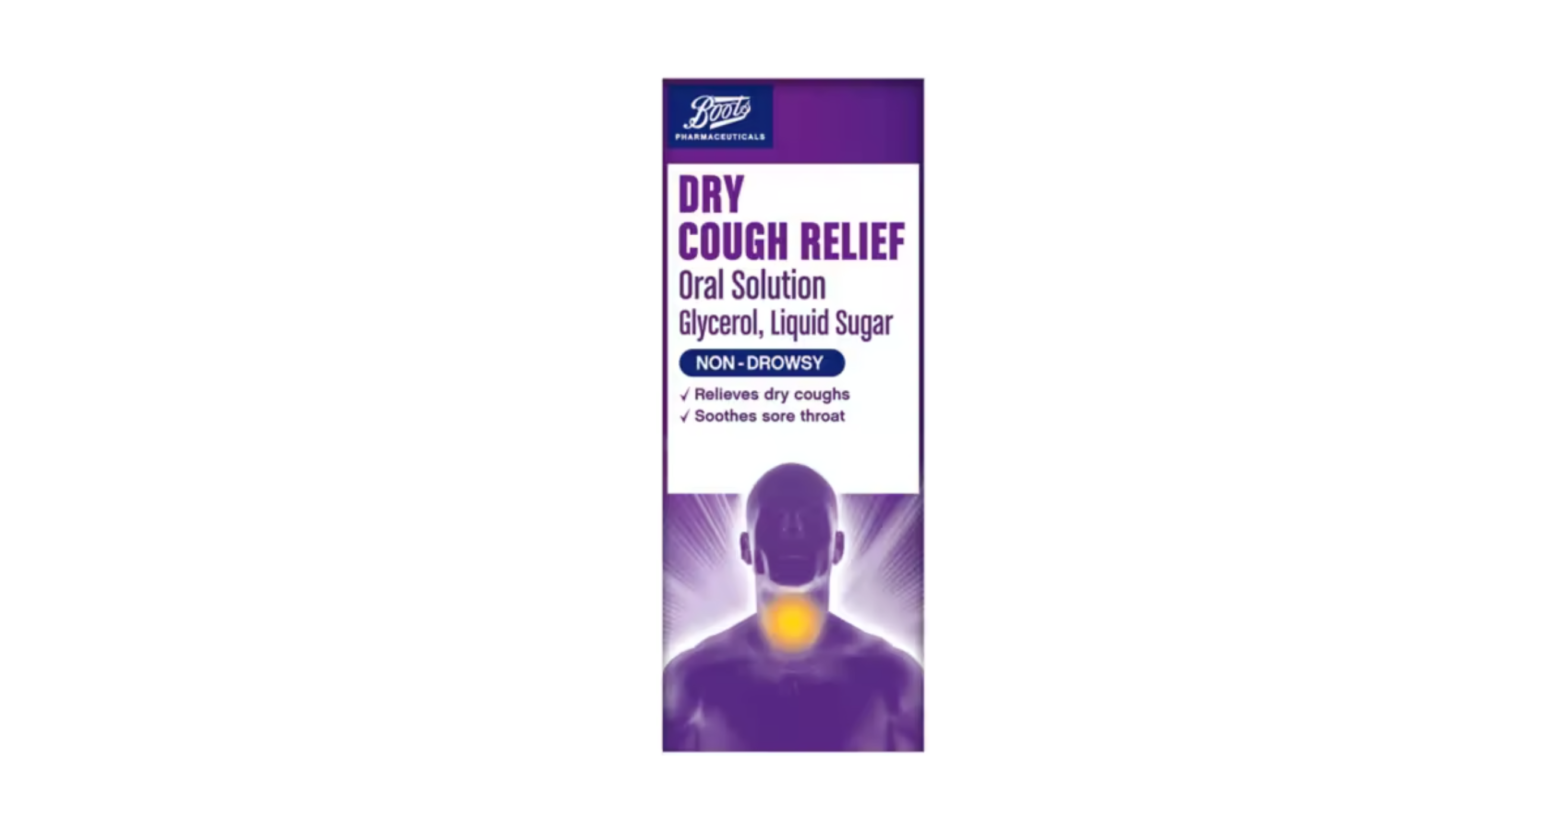 Boots Dry Cough Relief Oral Solution Glycerol Liquid Sugar Instructions